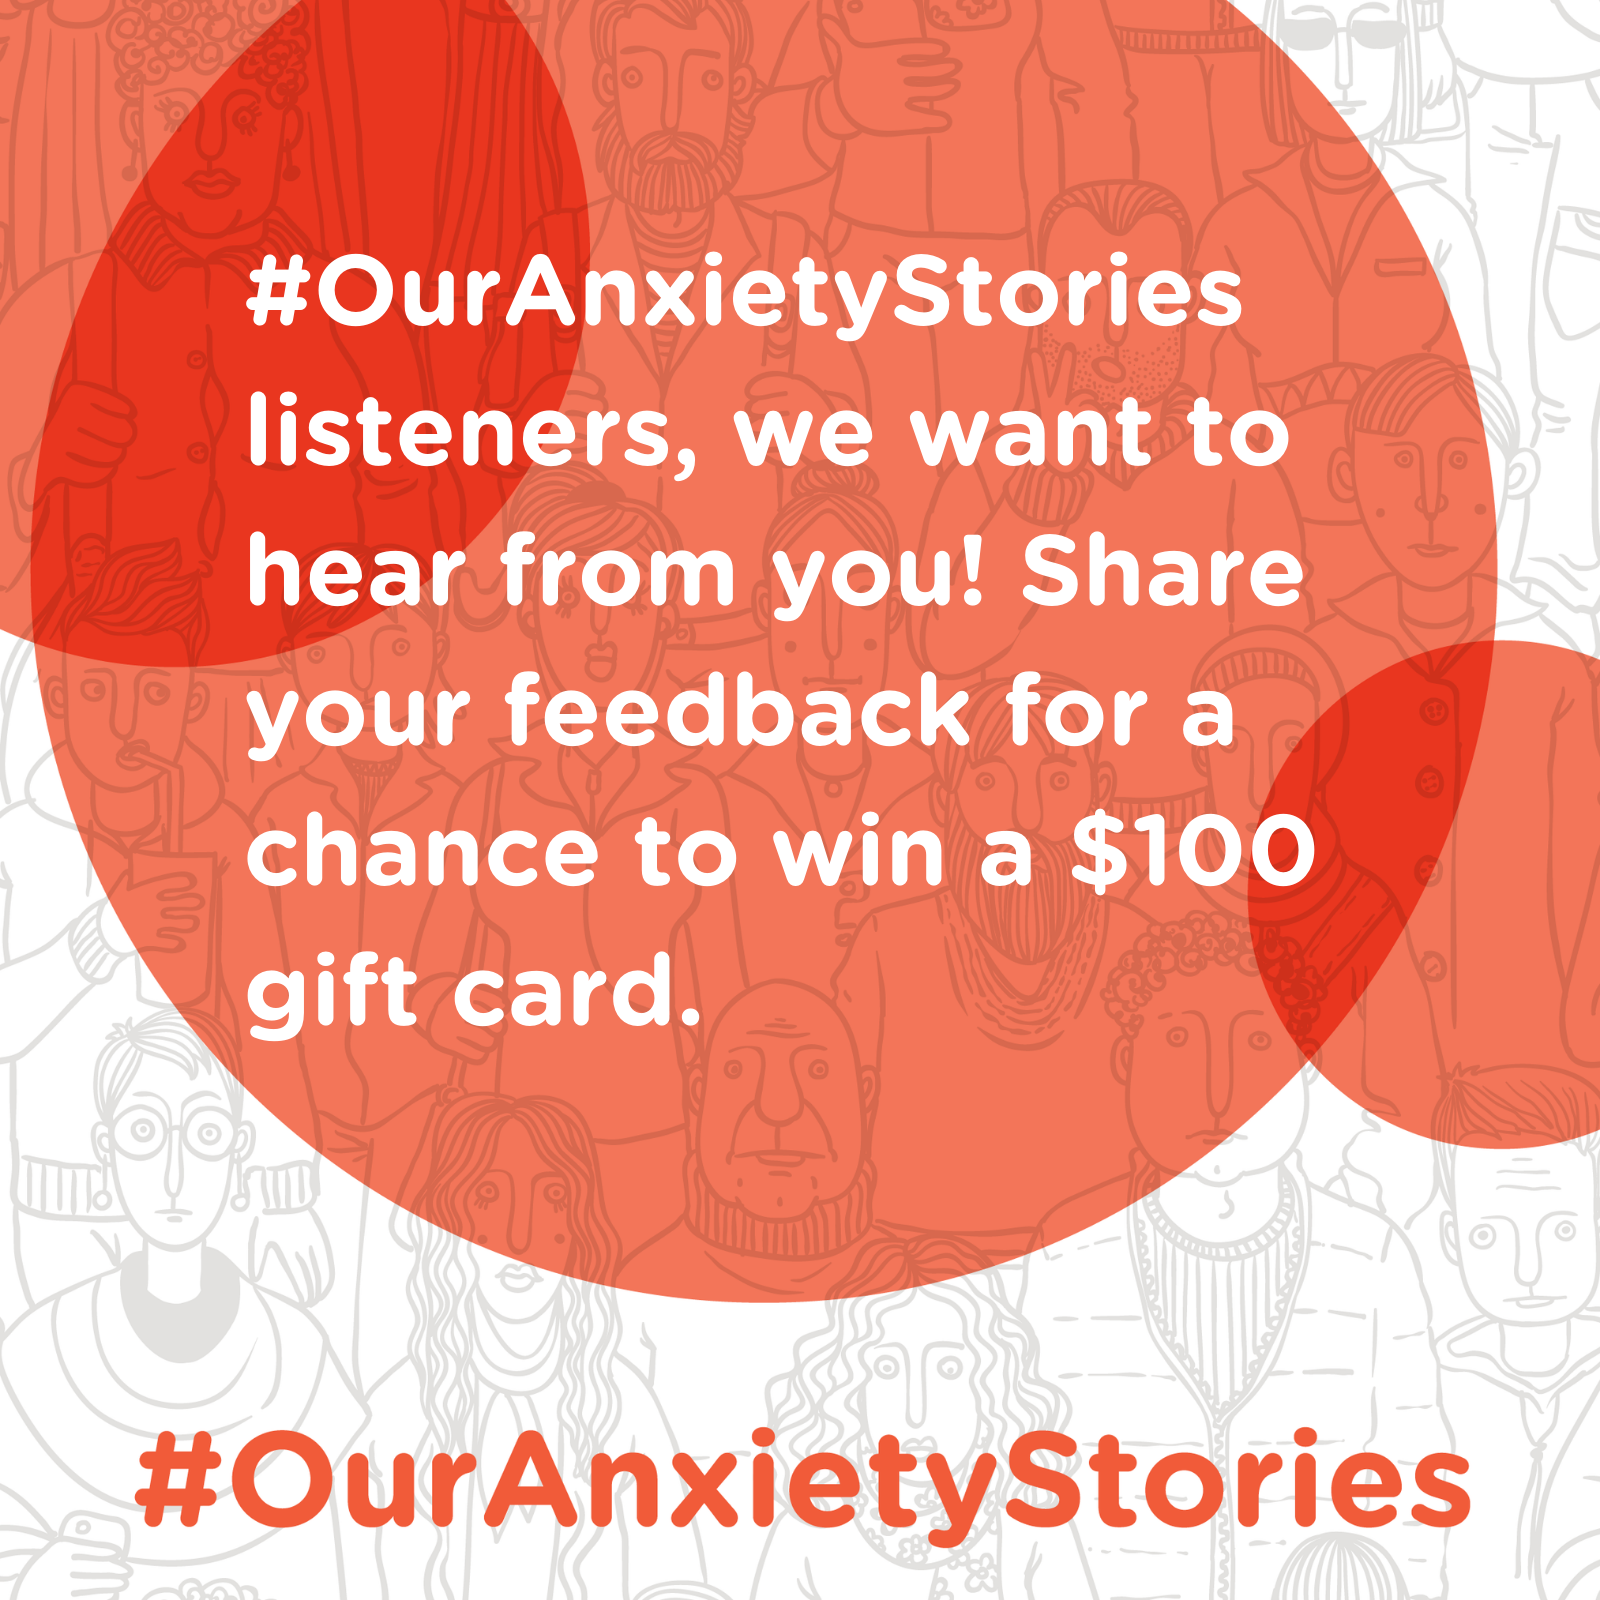 Tell Us What You Think About #OurAnxietyStories